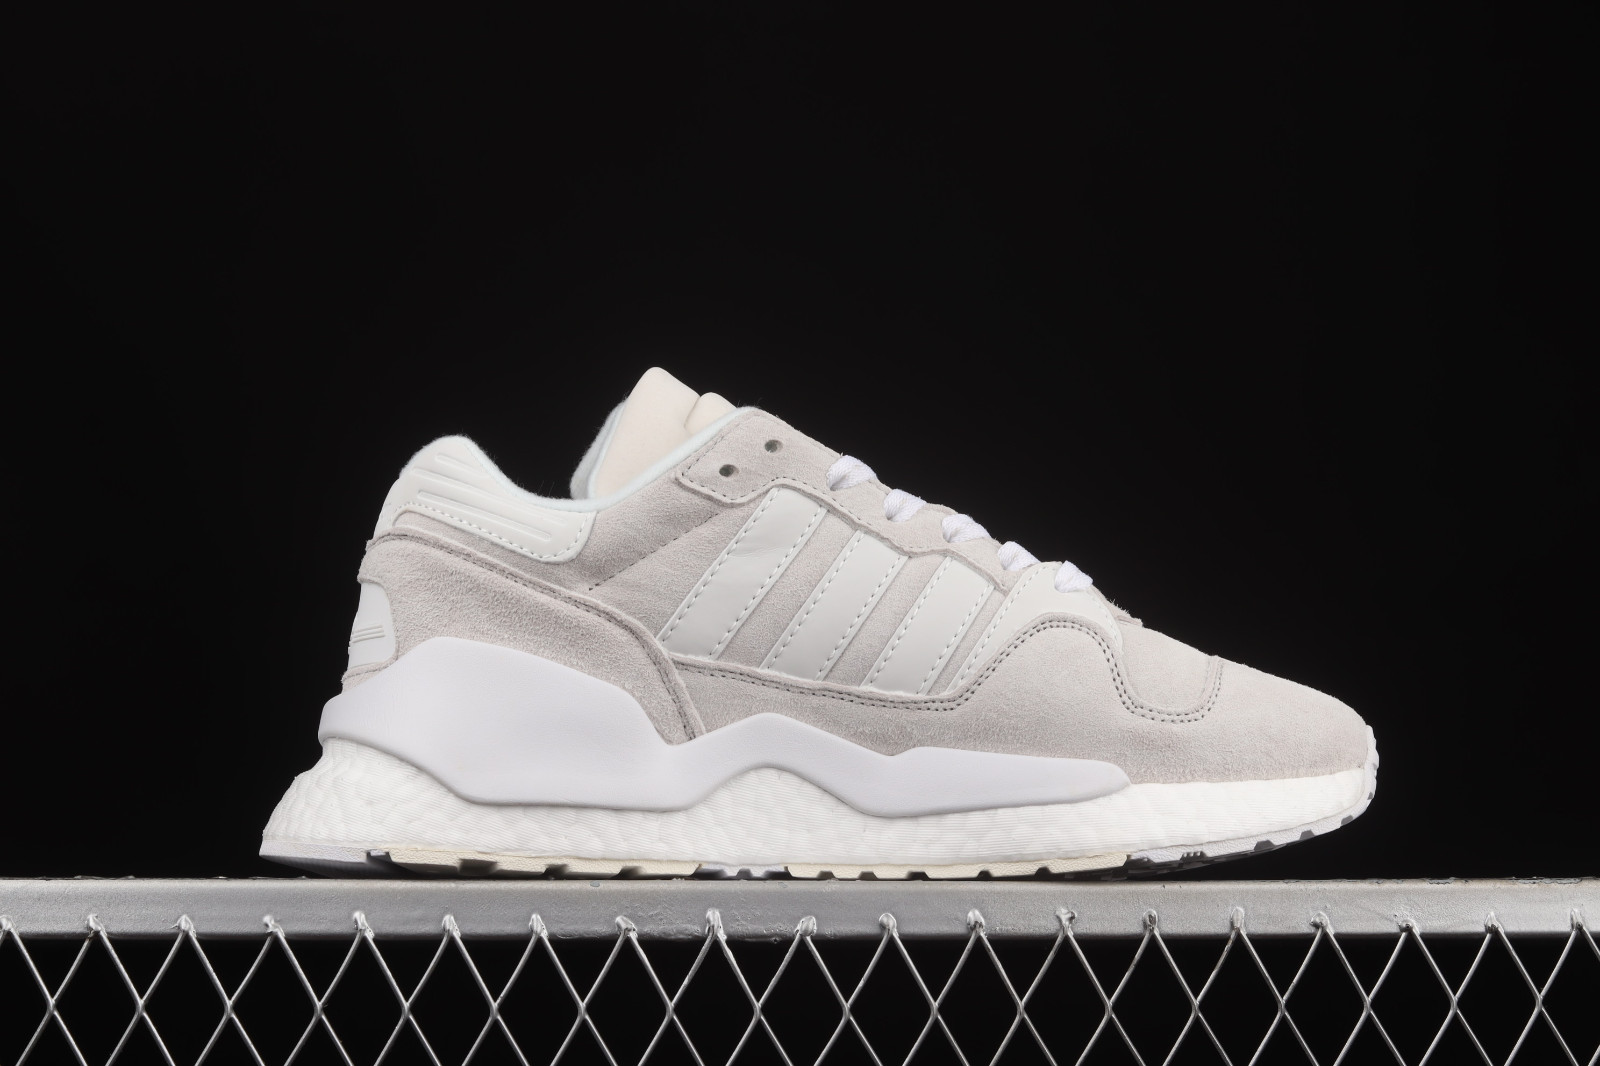 ZX930 x classics Adidas EQT Pack Cloud White Shoes G27503 Where To Buy The classics Adidas NMD R1 Black Leopard Print H00670 - Sepsale